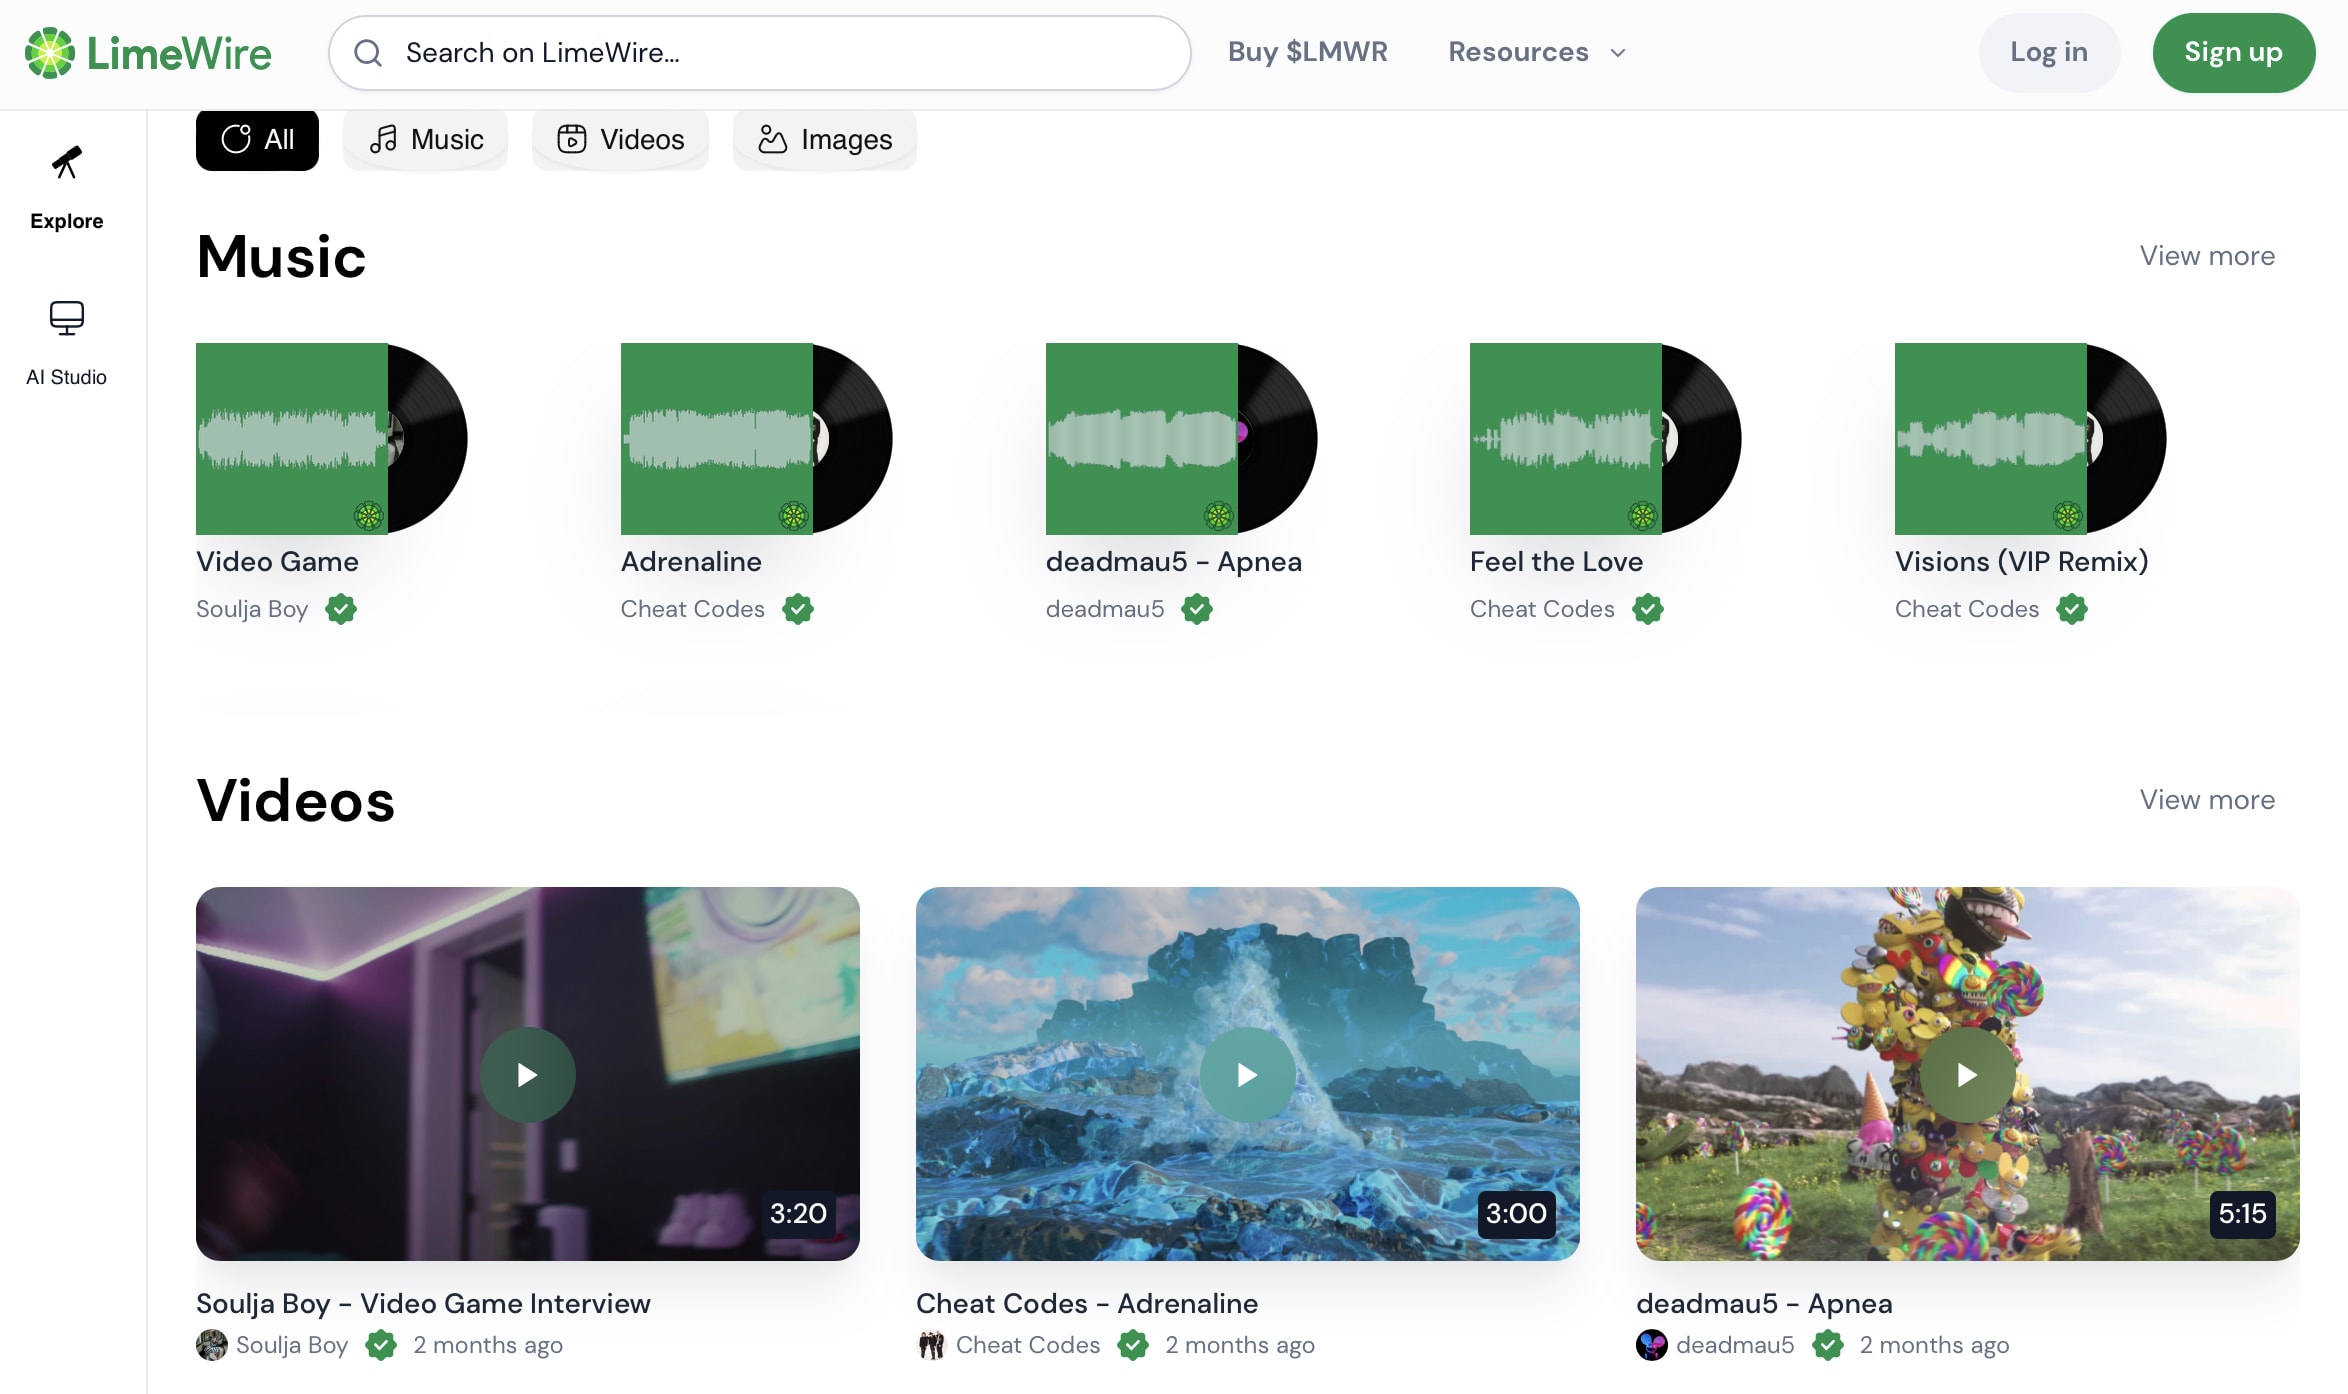 On the LimeWire homepage, you can access tools to create and edit images. In the near future, you'll be able to work with videos and music, too.